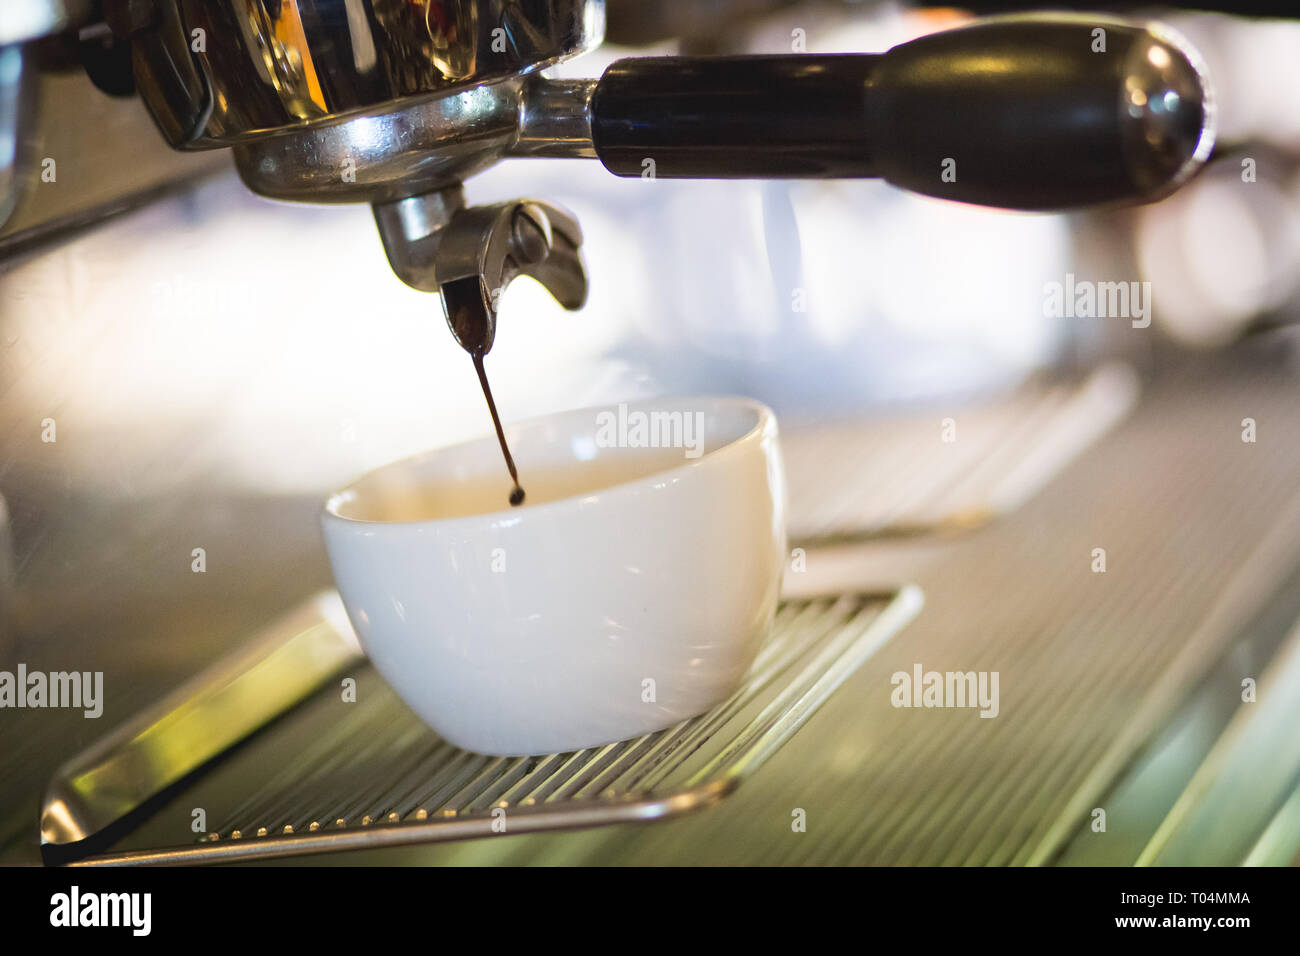 https://c8.alamy.com/comp/T04MMA/coffee-machine-dripping-in-to-coffee-cup-T04MMA.jpg